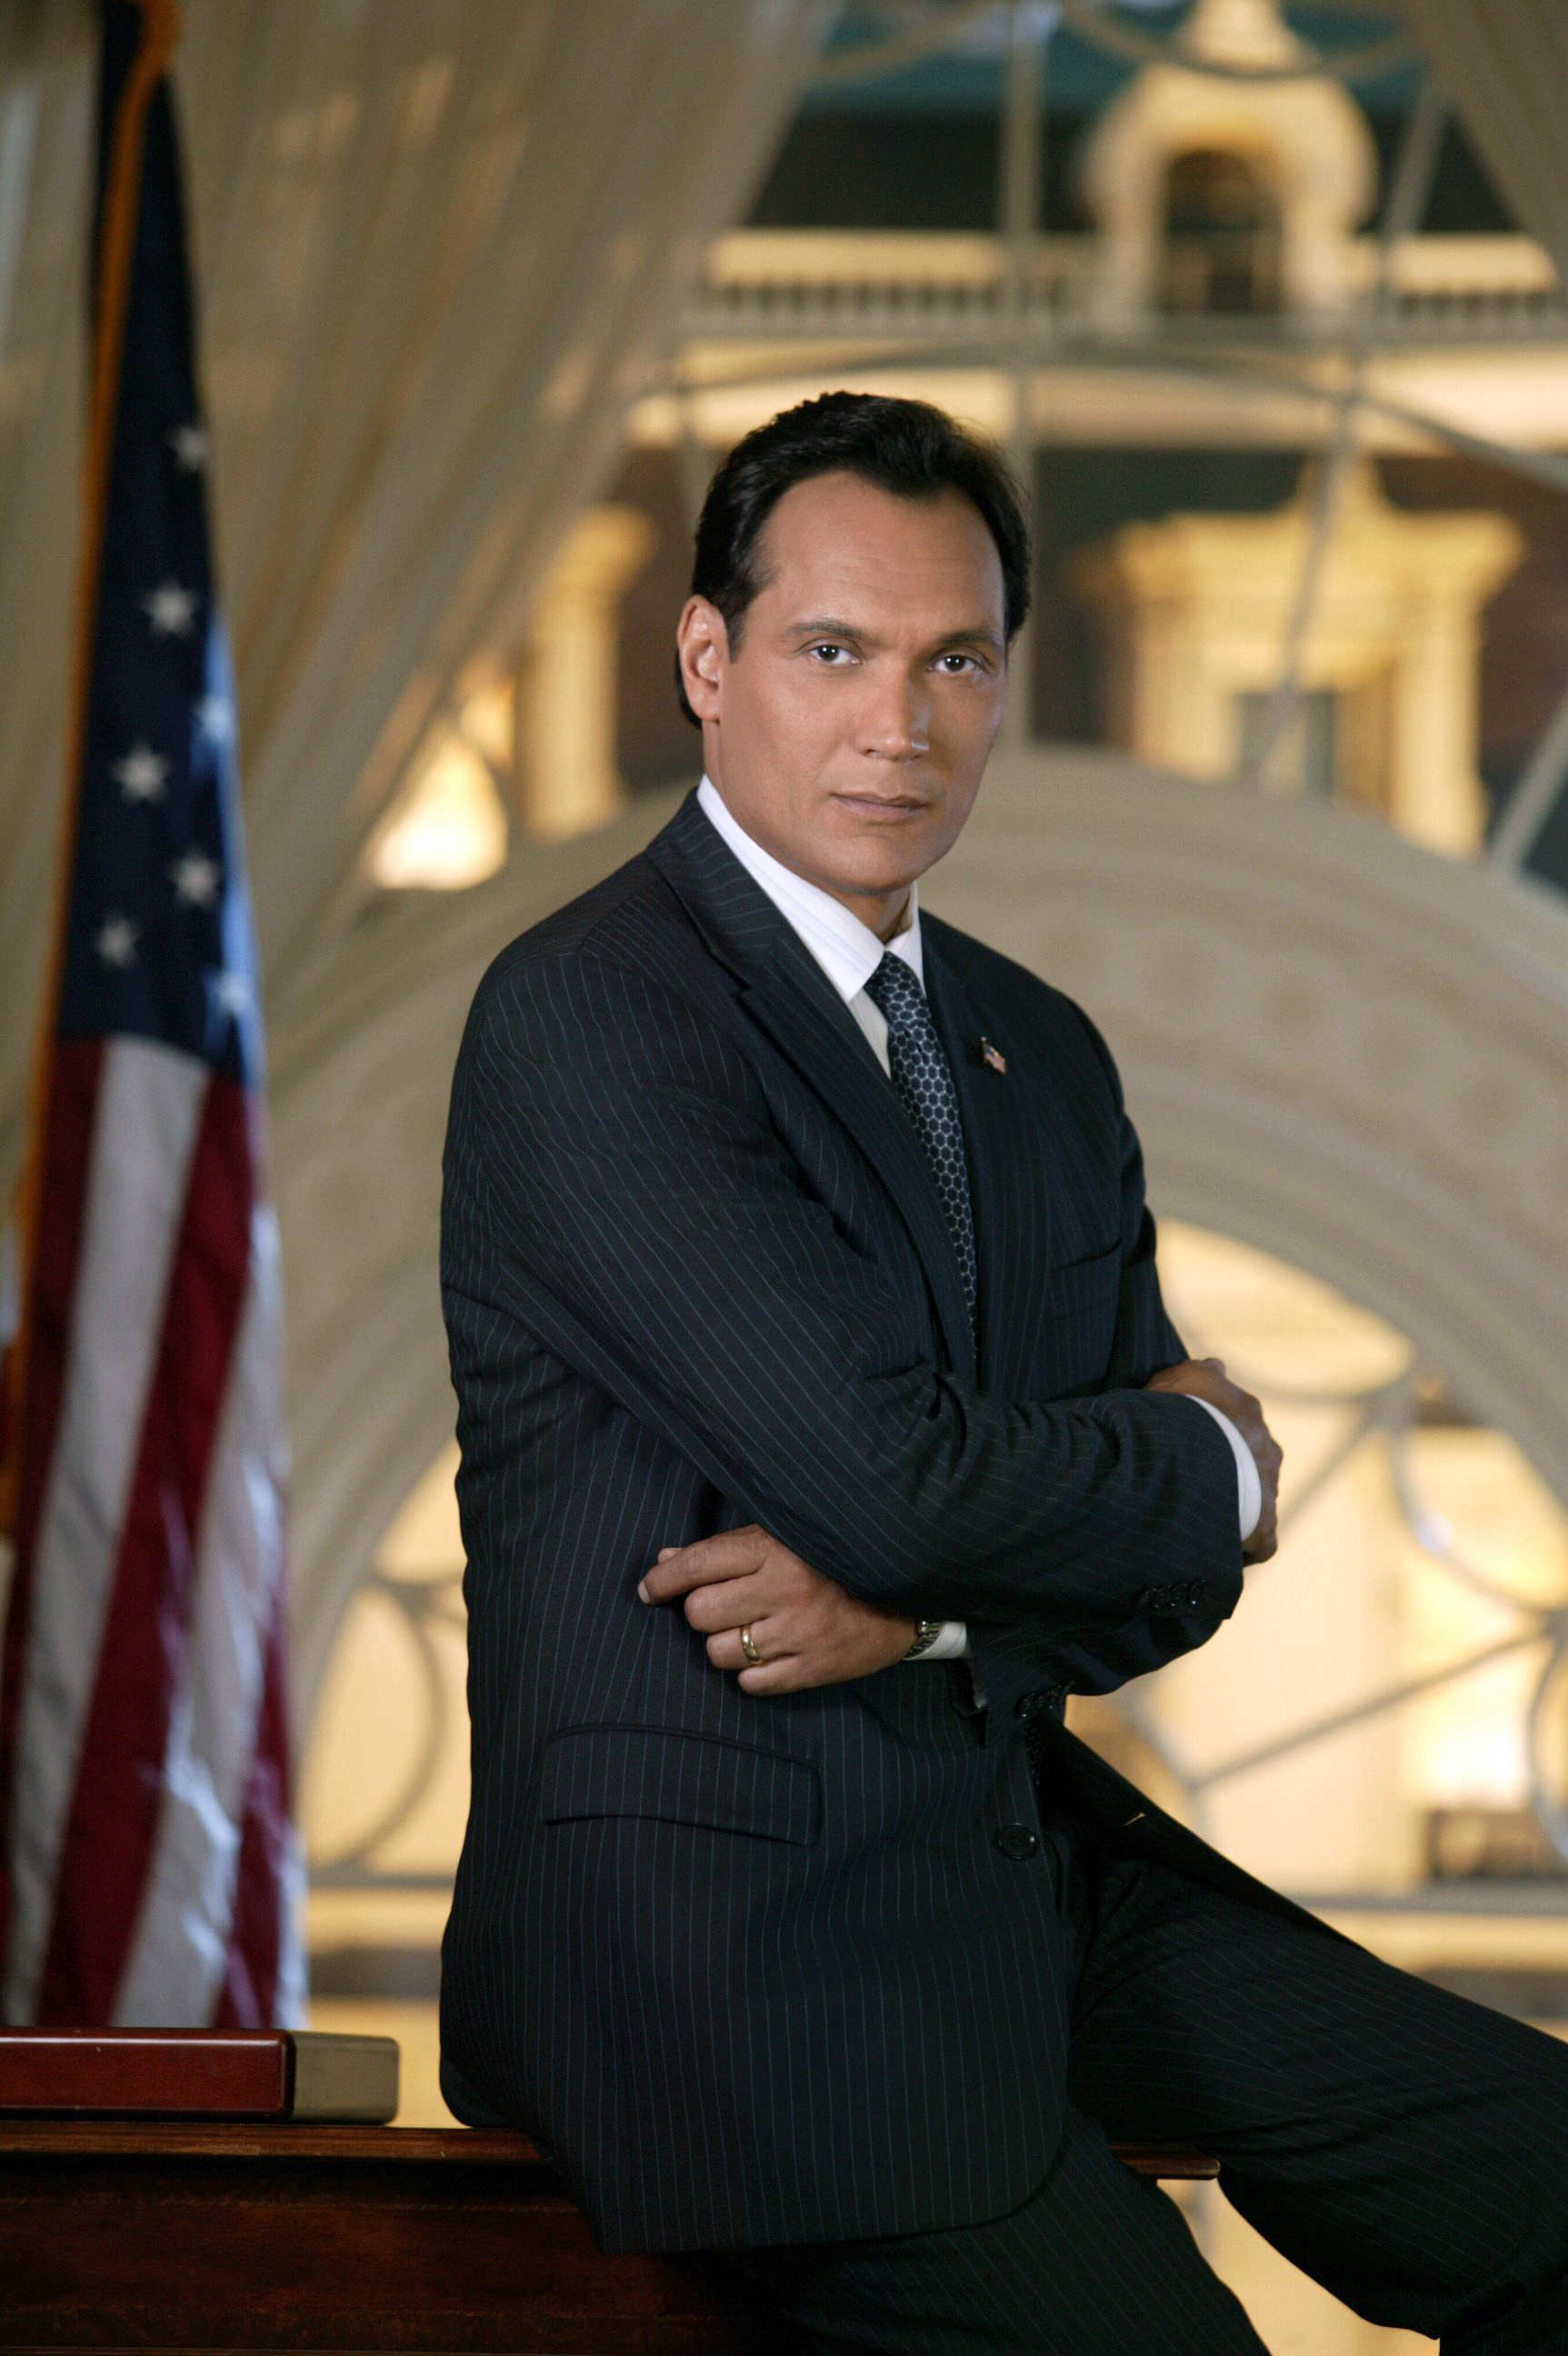 The West Wing (TV Series): Jimmy Smits as Matthew Santos, The first Hispanic American to serve as the President. 1730x2600 HD Wallpaper.